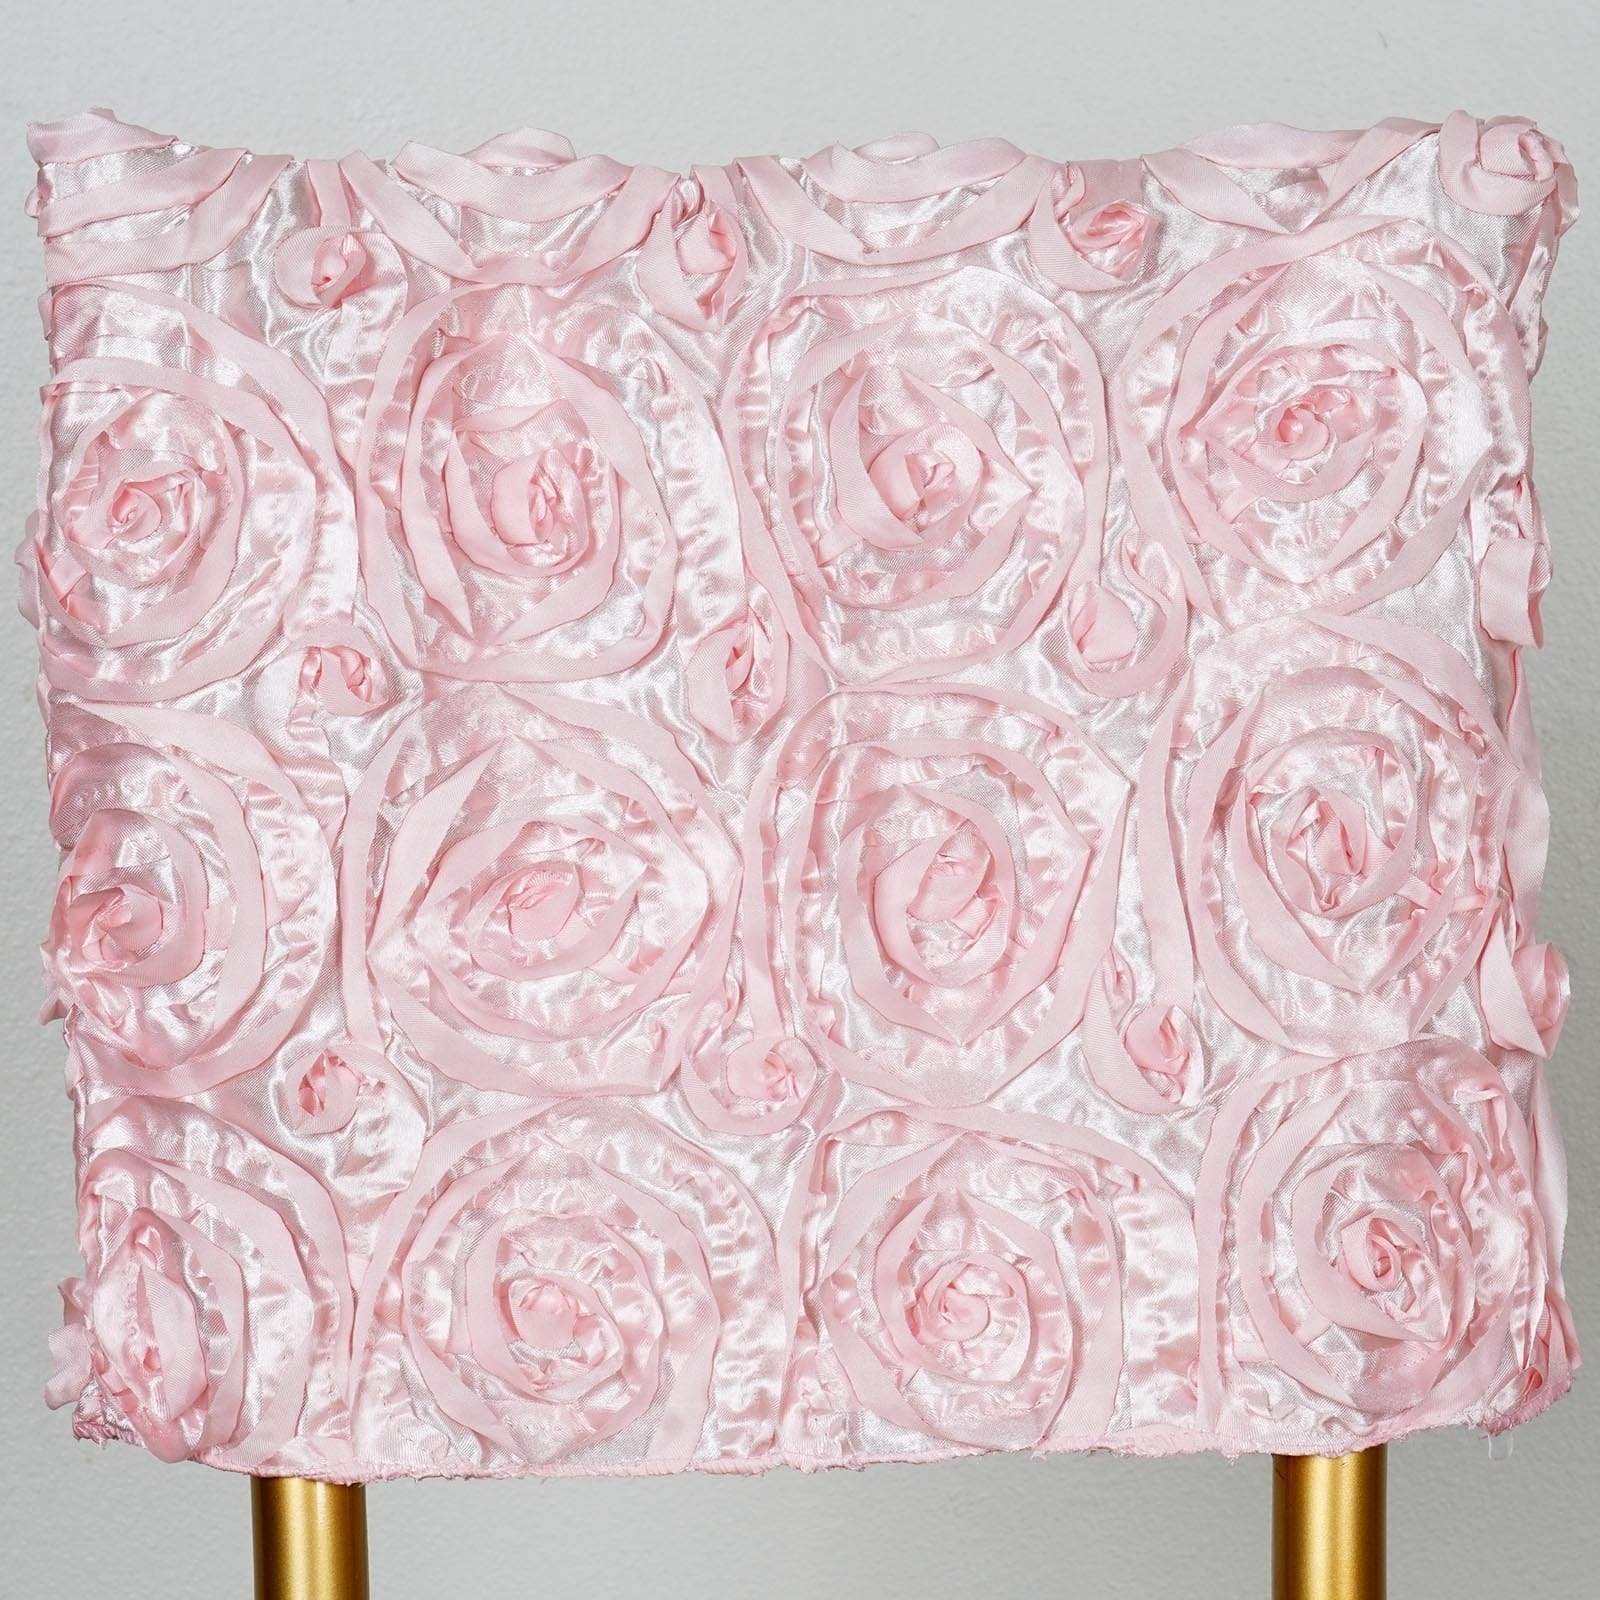 Raised Roses Square Chair Cap Covers Party Supplies